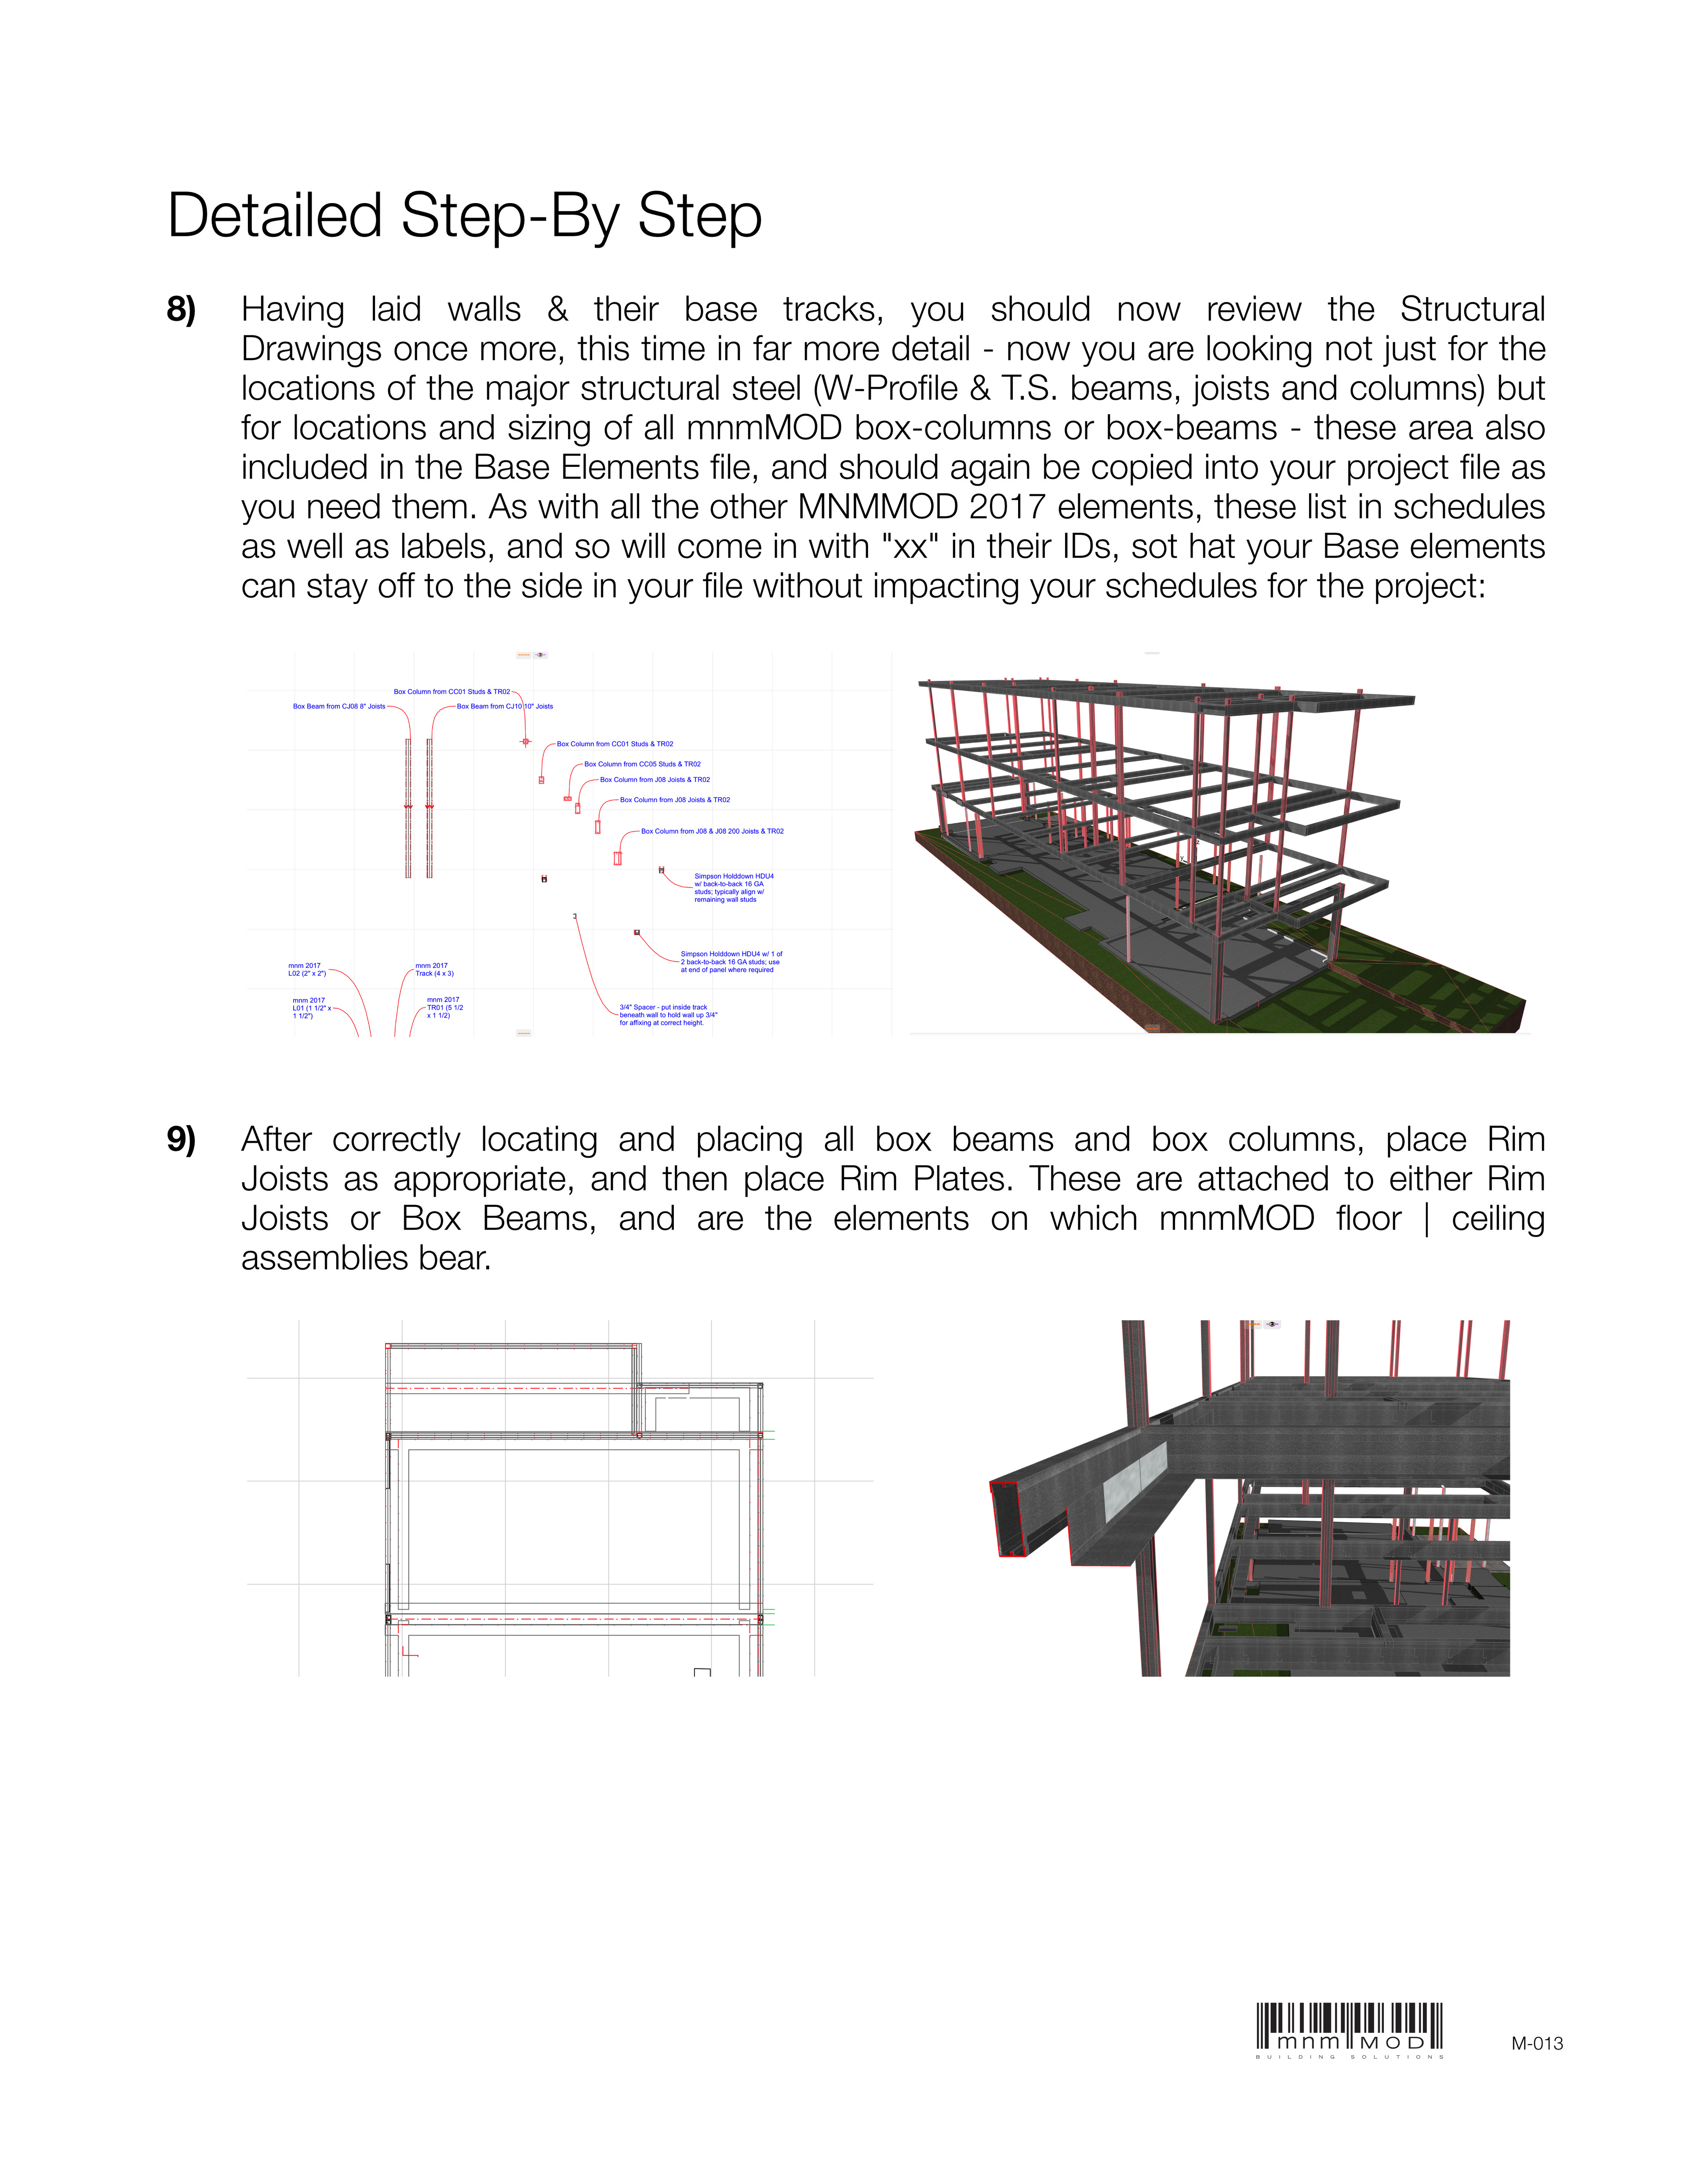 In this technical documentation I developed to accompany the BIM tool I developed for a design  firm, I made extensive use of perspective views, including perspective sections and details, to convey complex spatial relationships efficiently and clearly. 